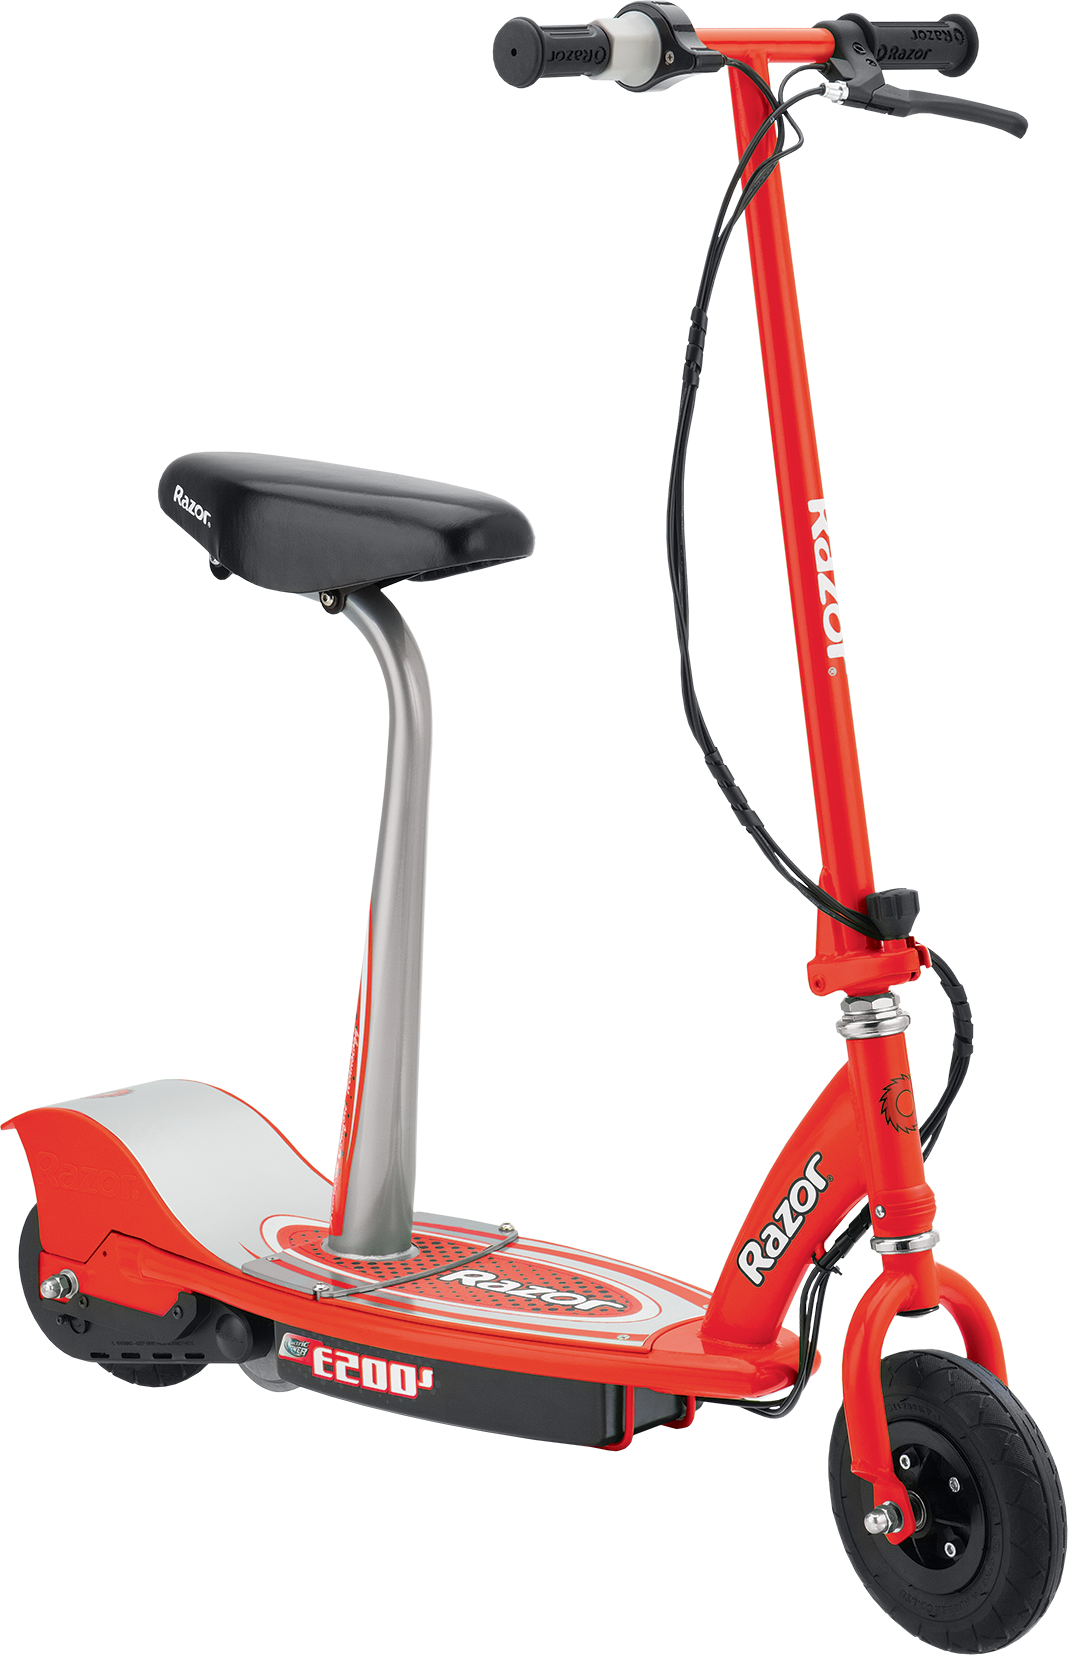 electric seated scooter for adults